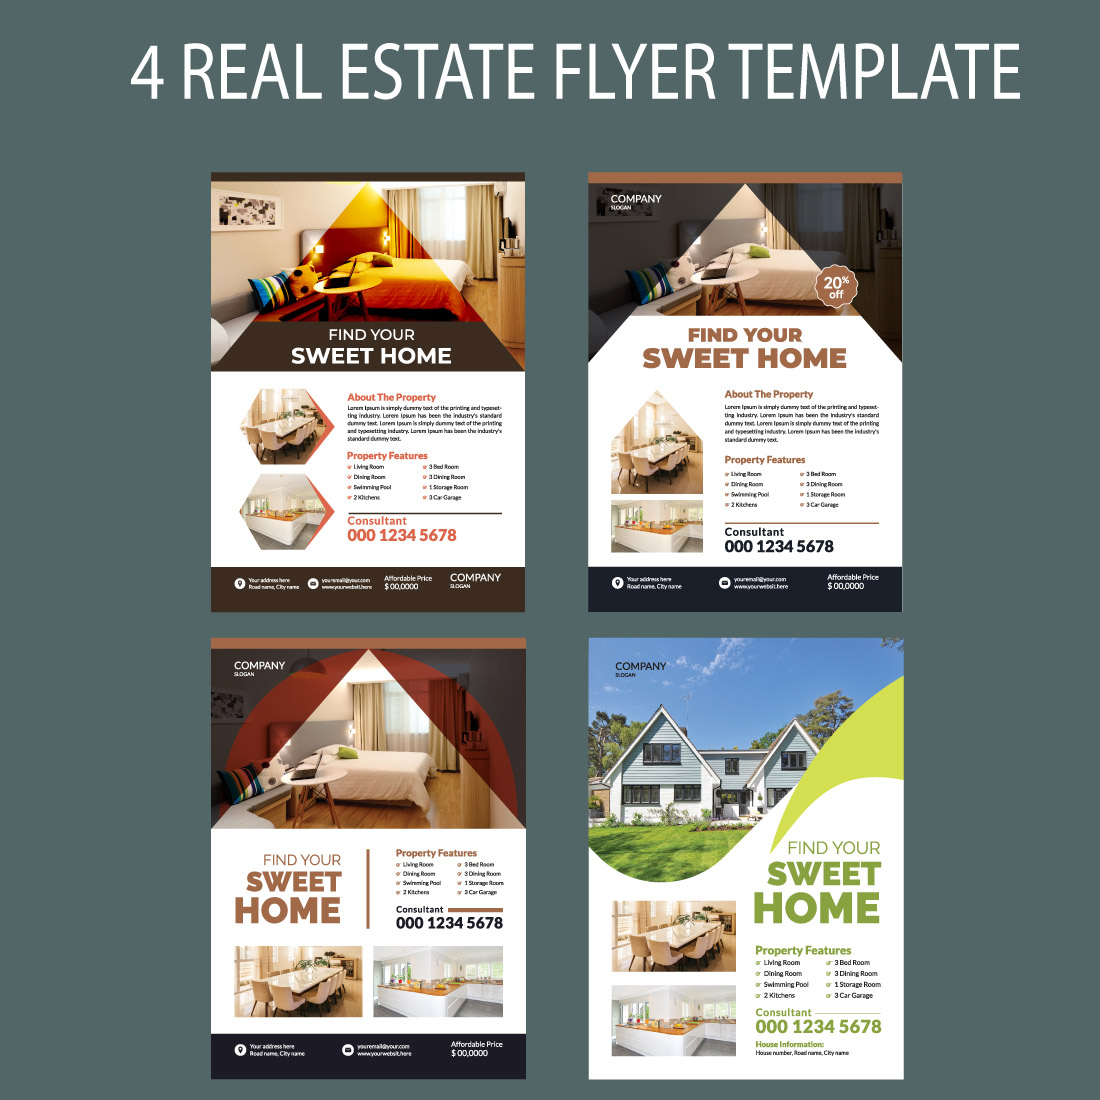 4 Real Estate Flyer Templates cover image.